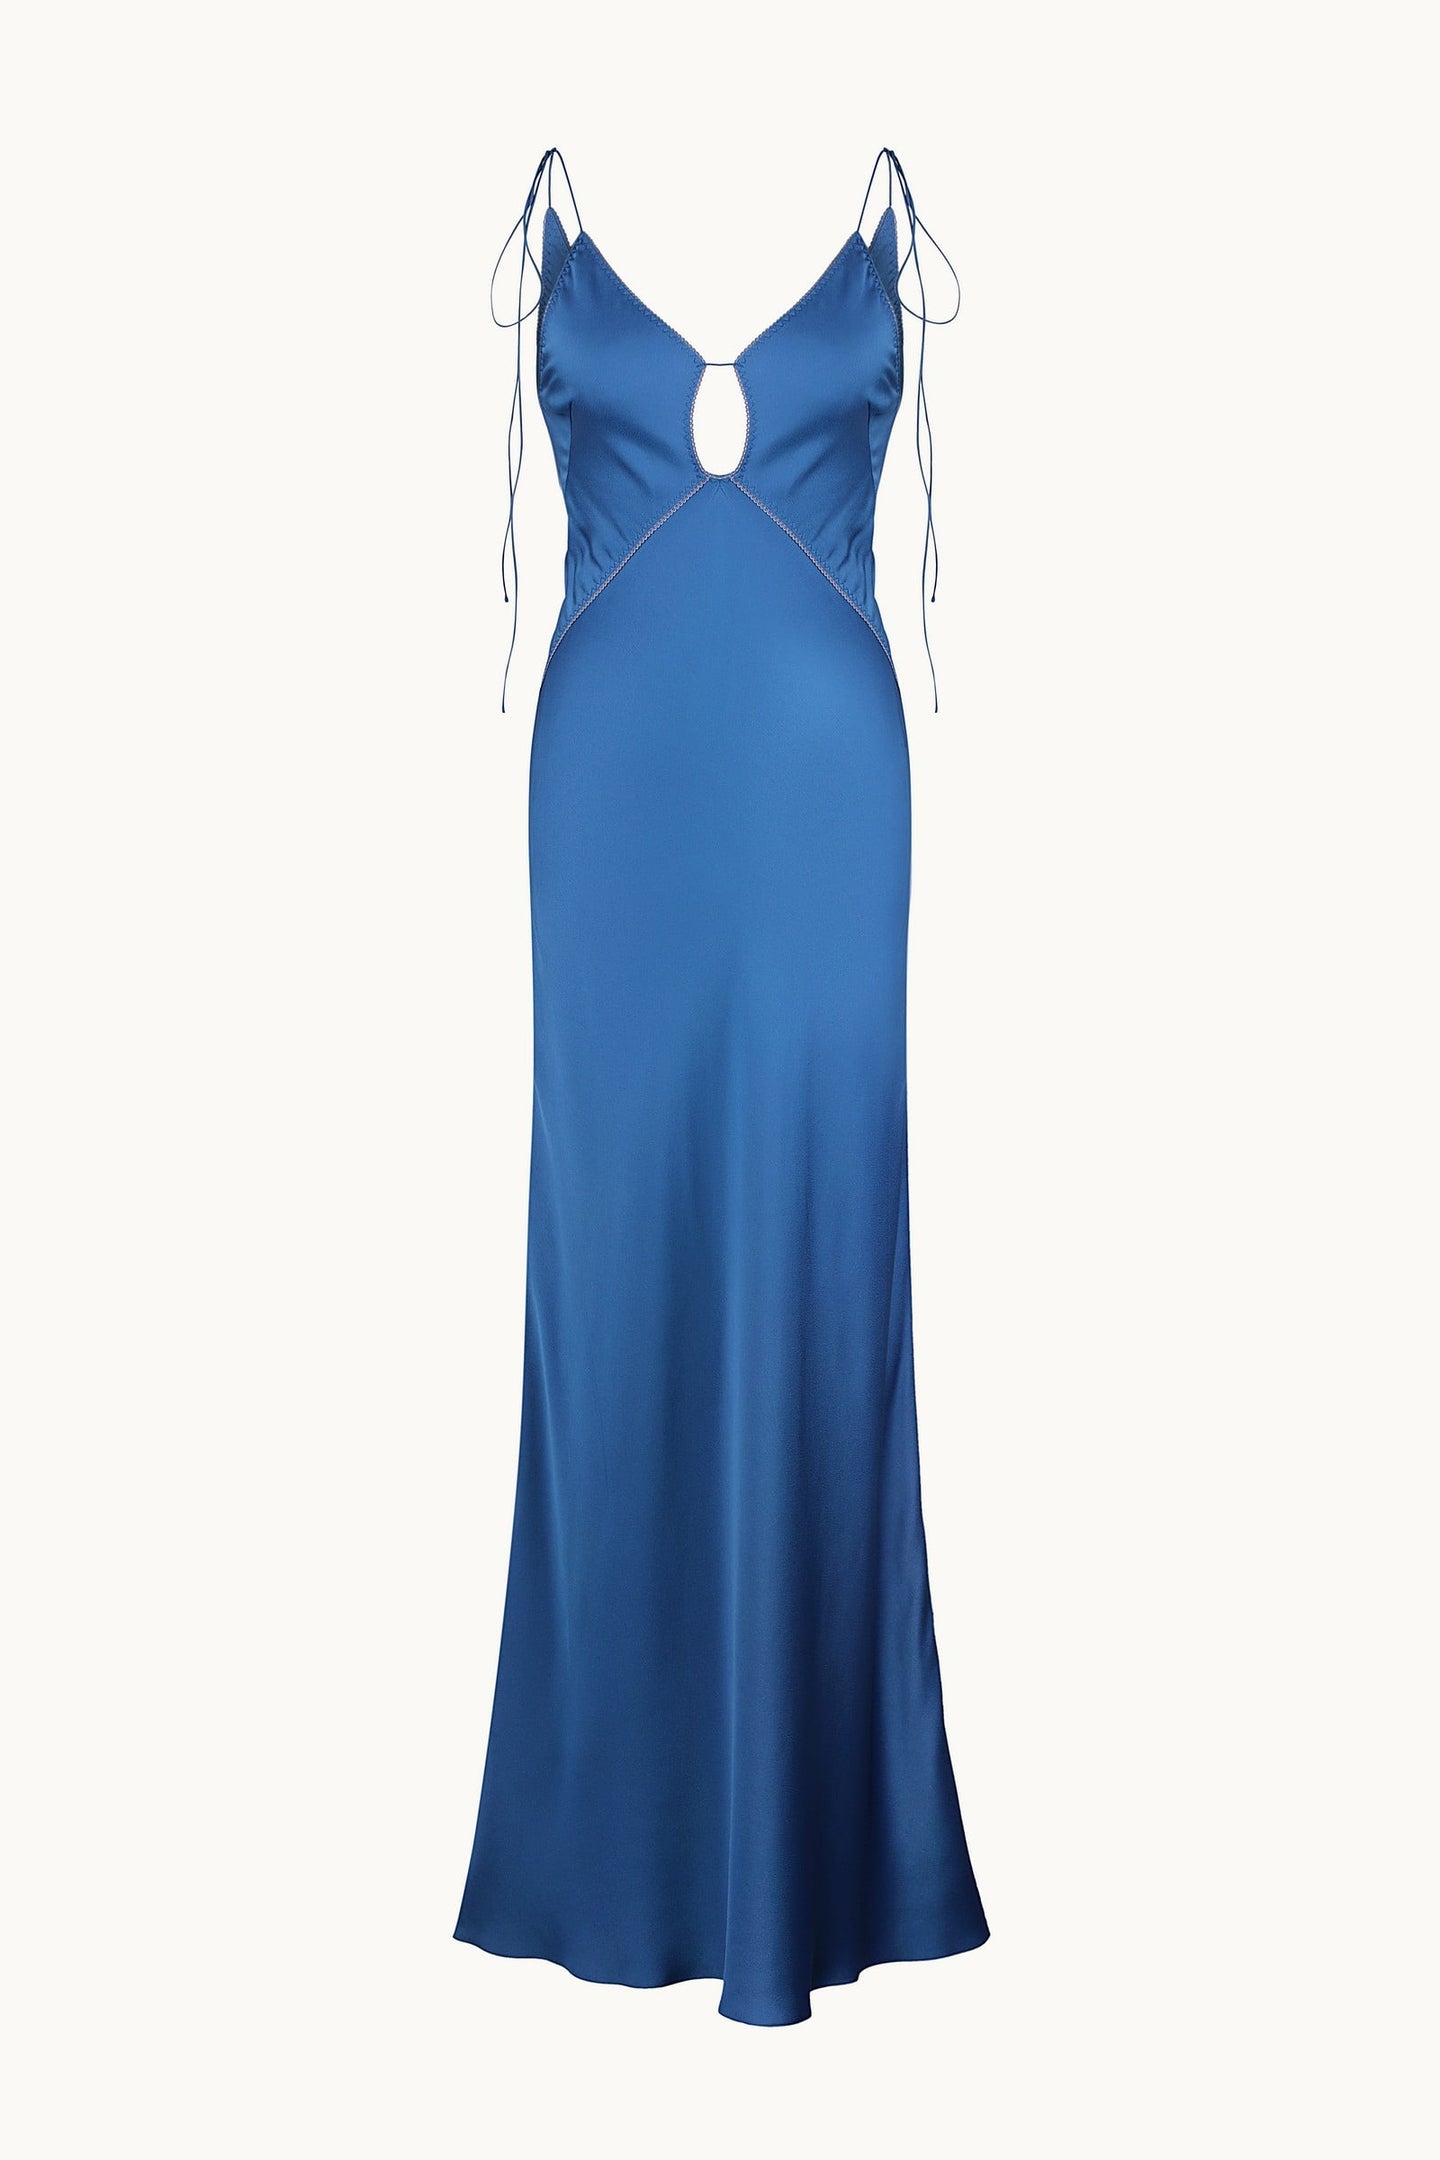 Terrin blue dress front view